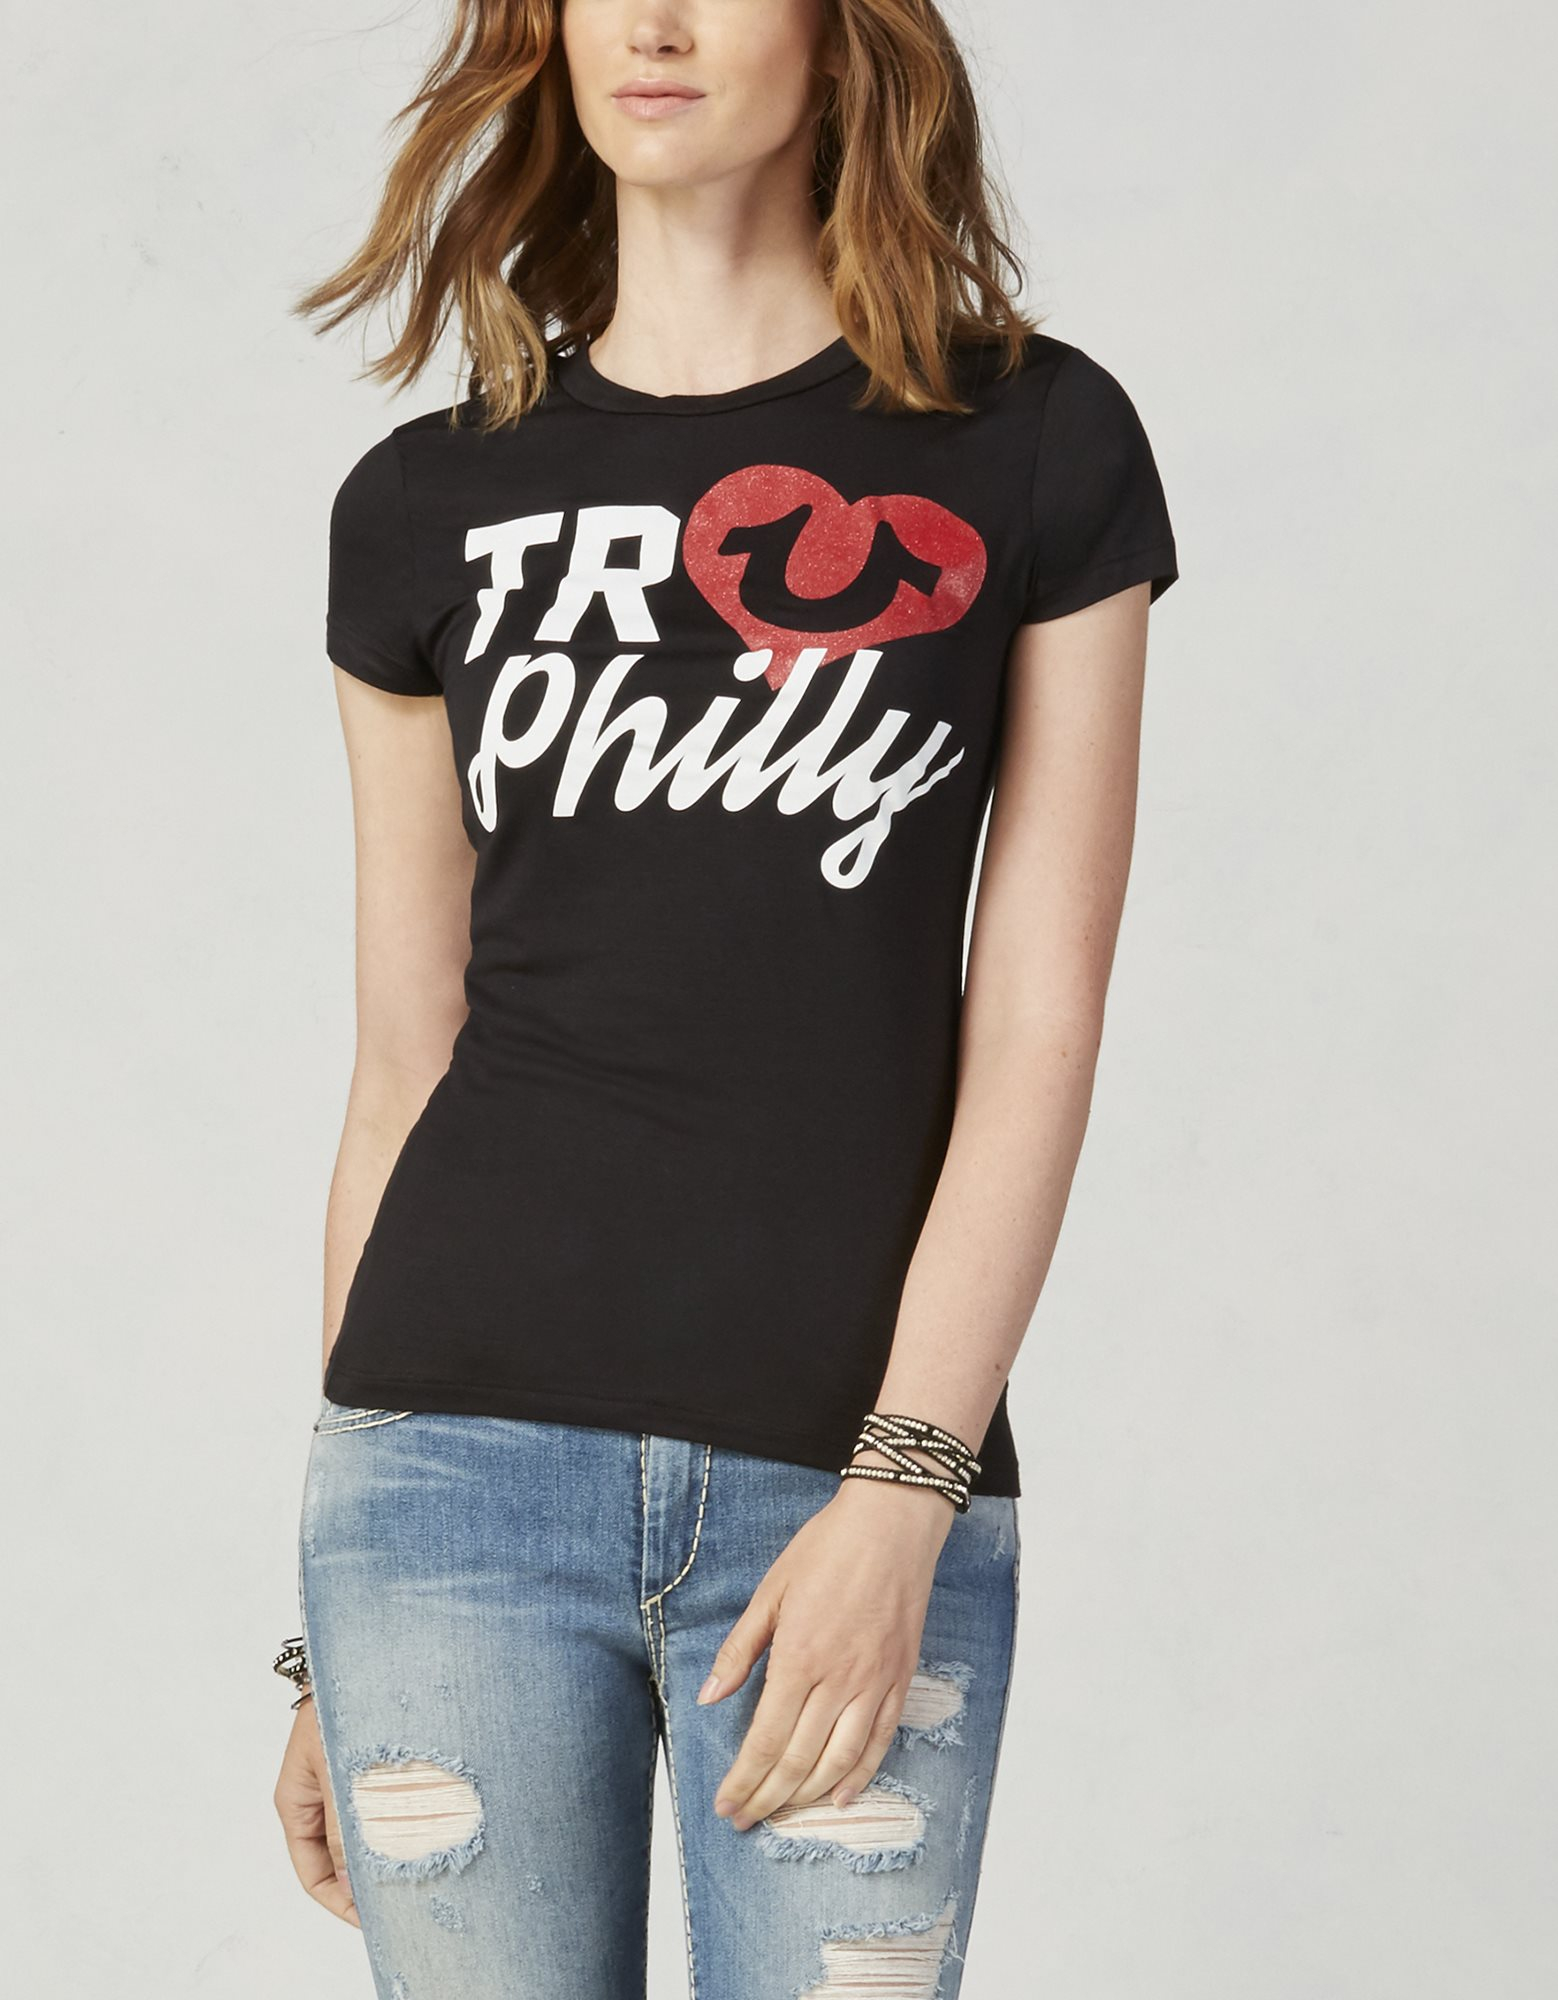 True religion Tr Philly Womens T-Shirt in Black | Lyst